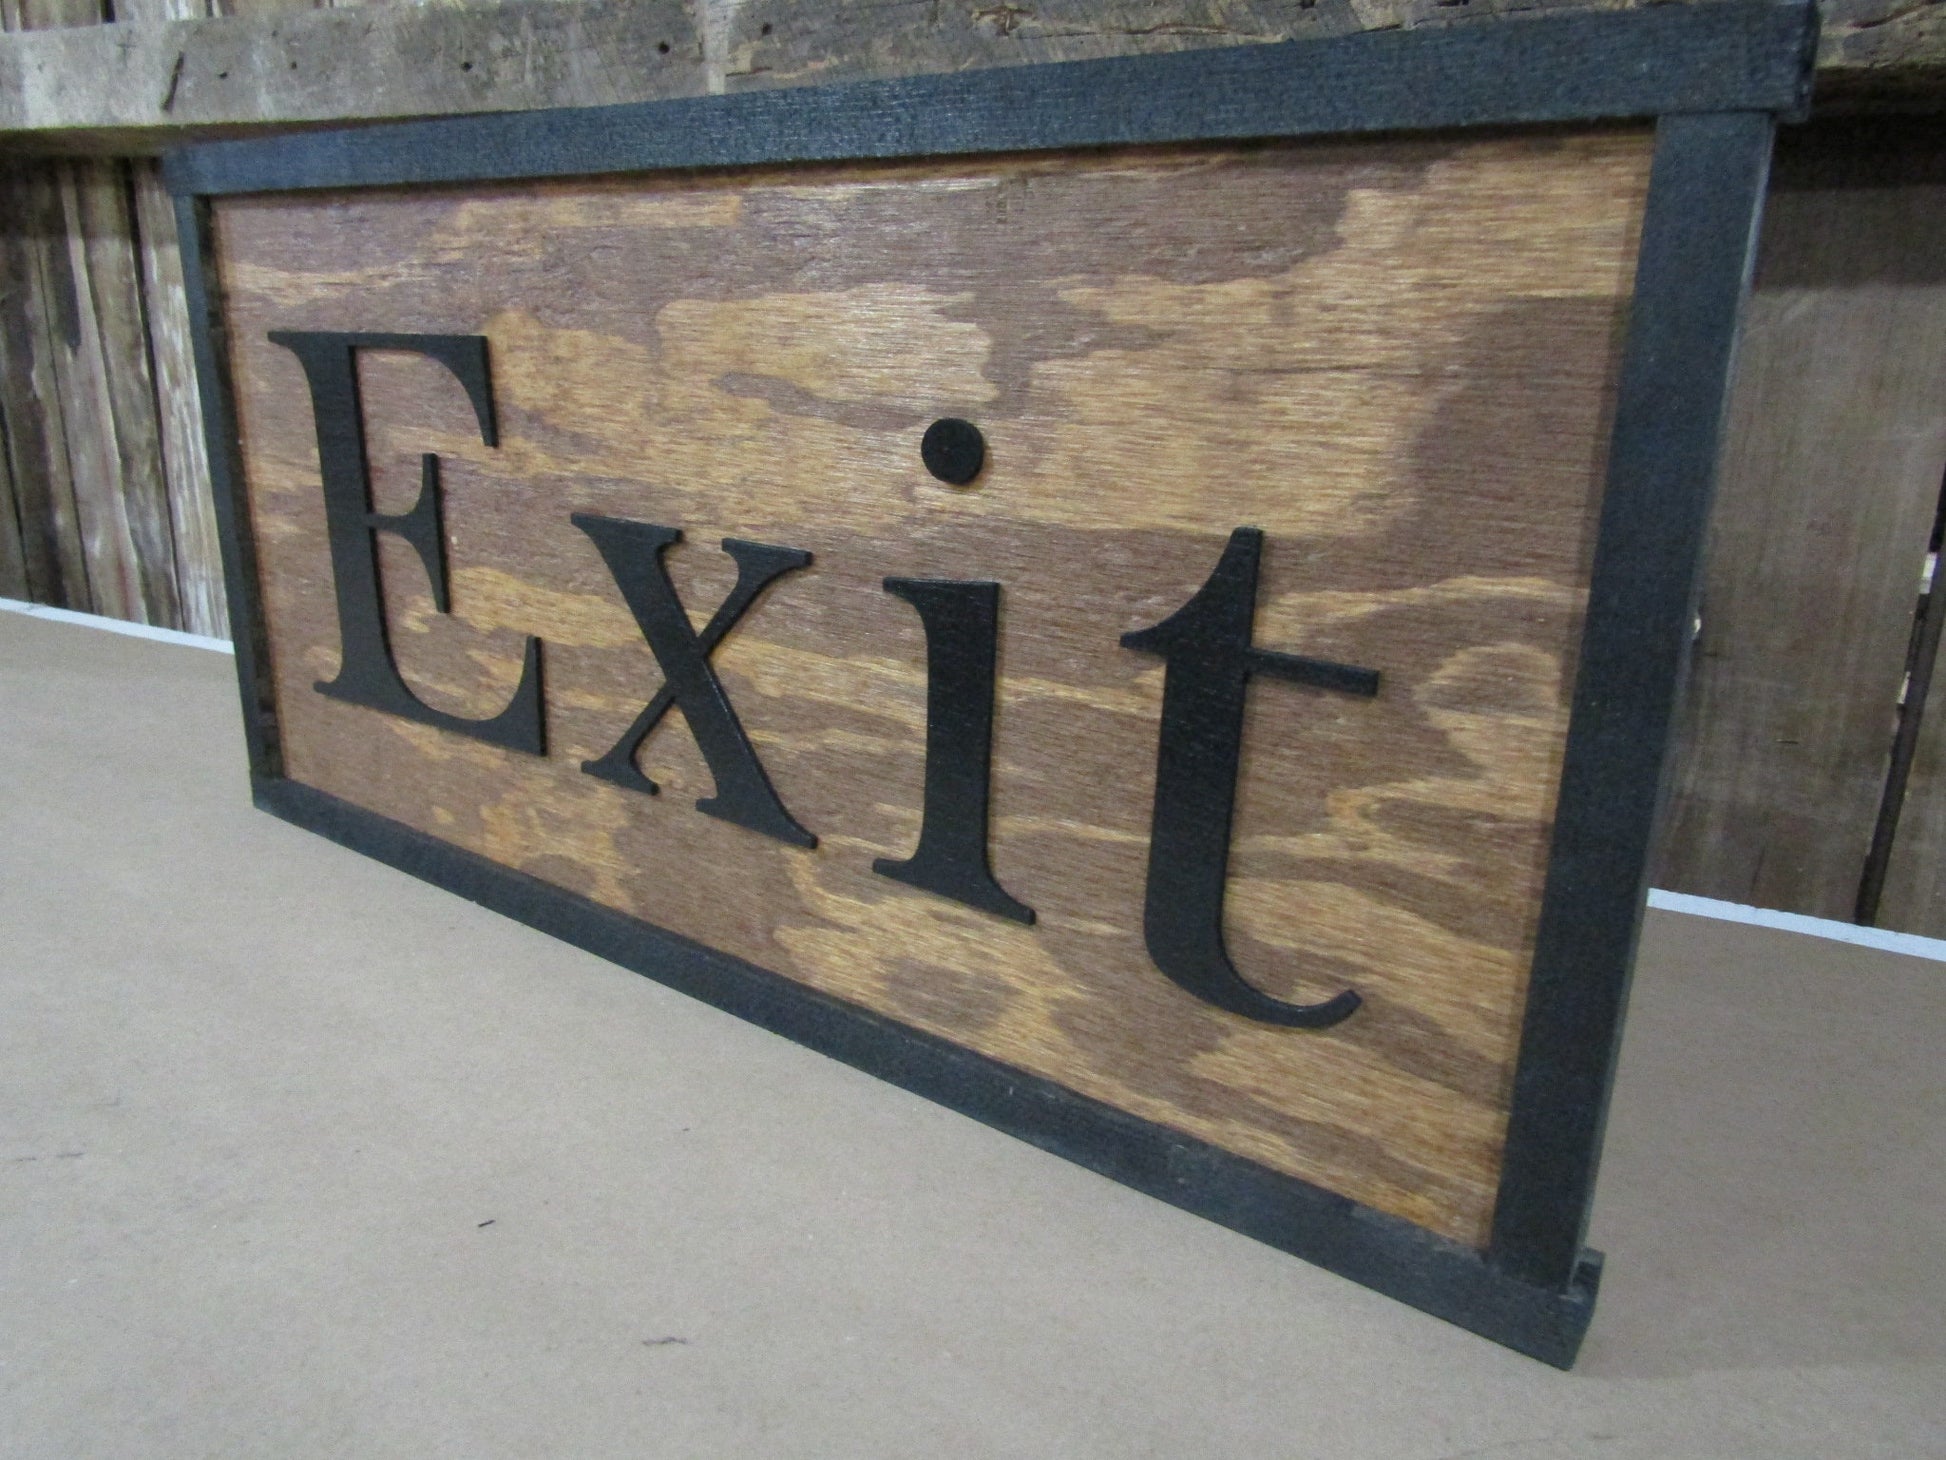 Exit Sign Directional Ranch Sign Company Name Address Signage Commerical Oversized Rustic Business Wood Laser Cut Out 3D Handmade